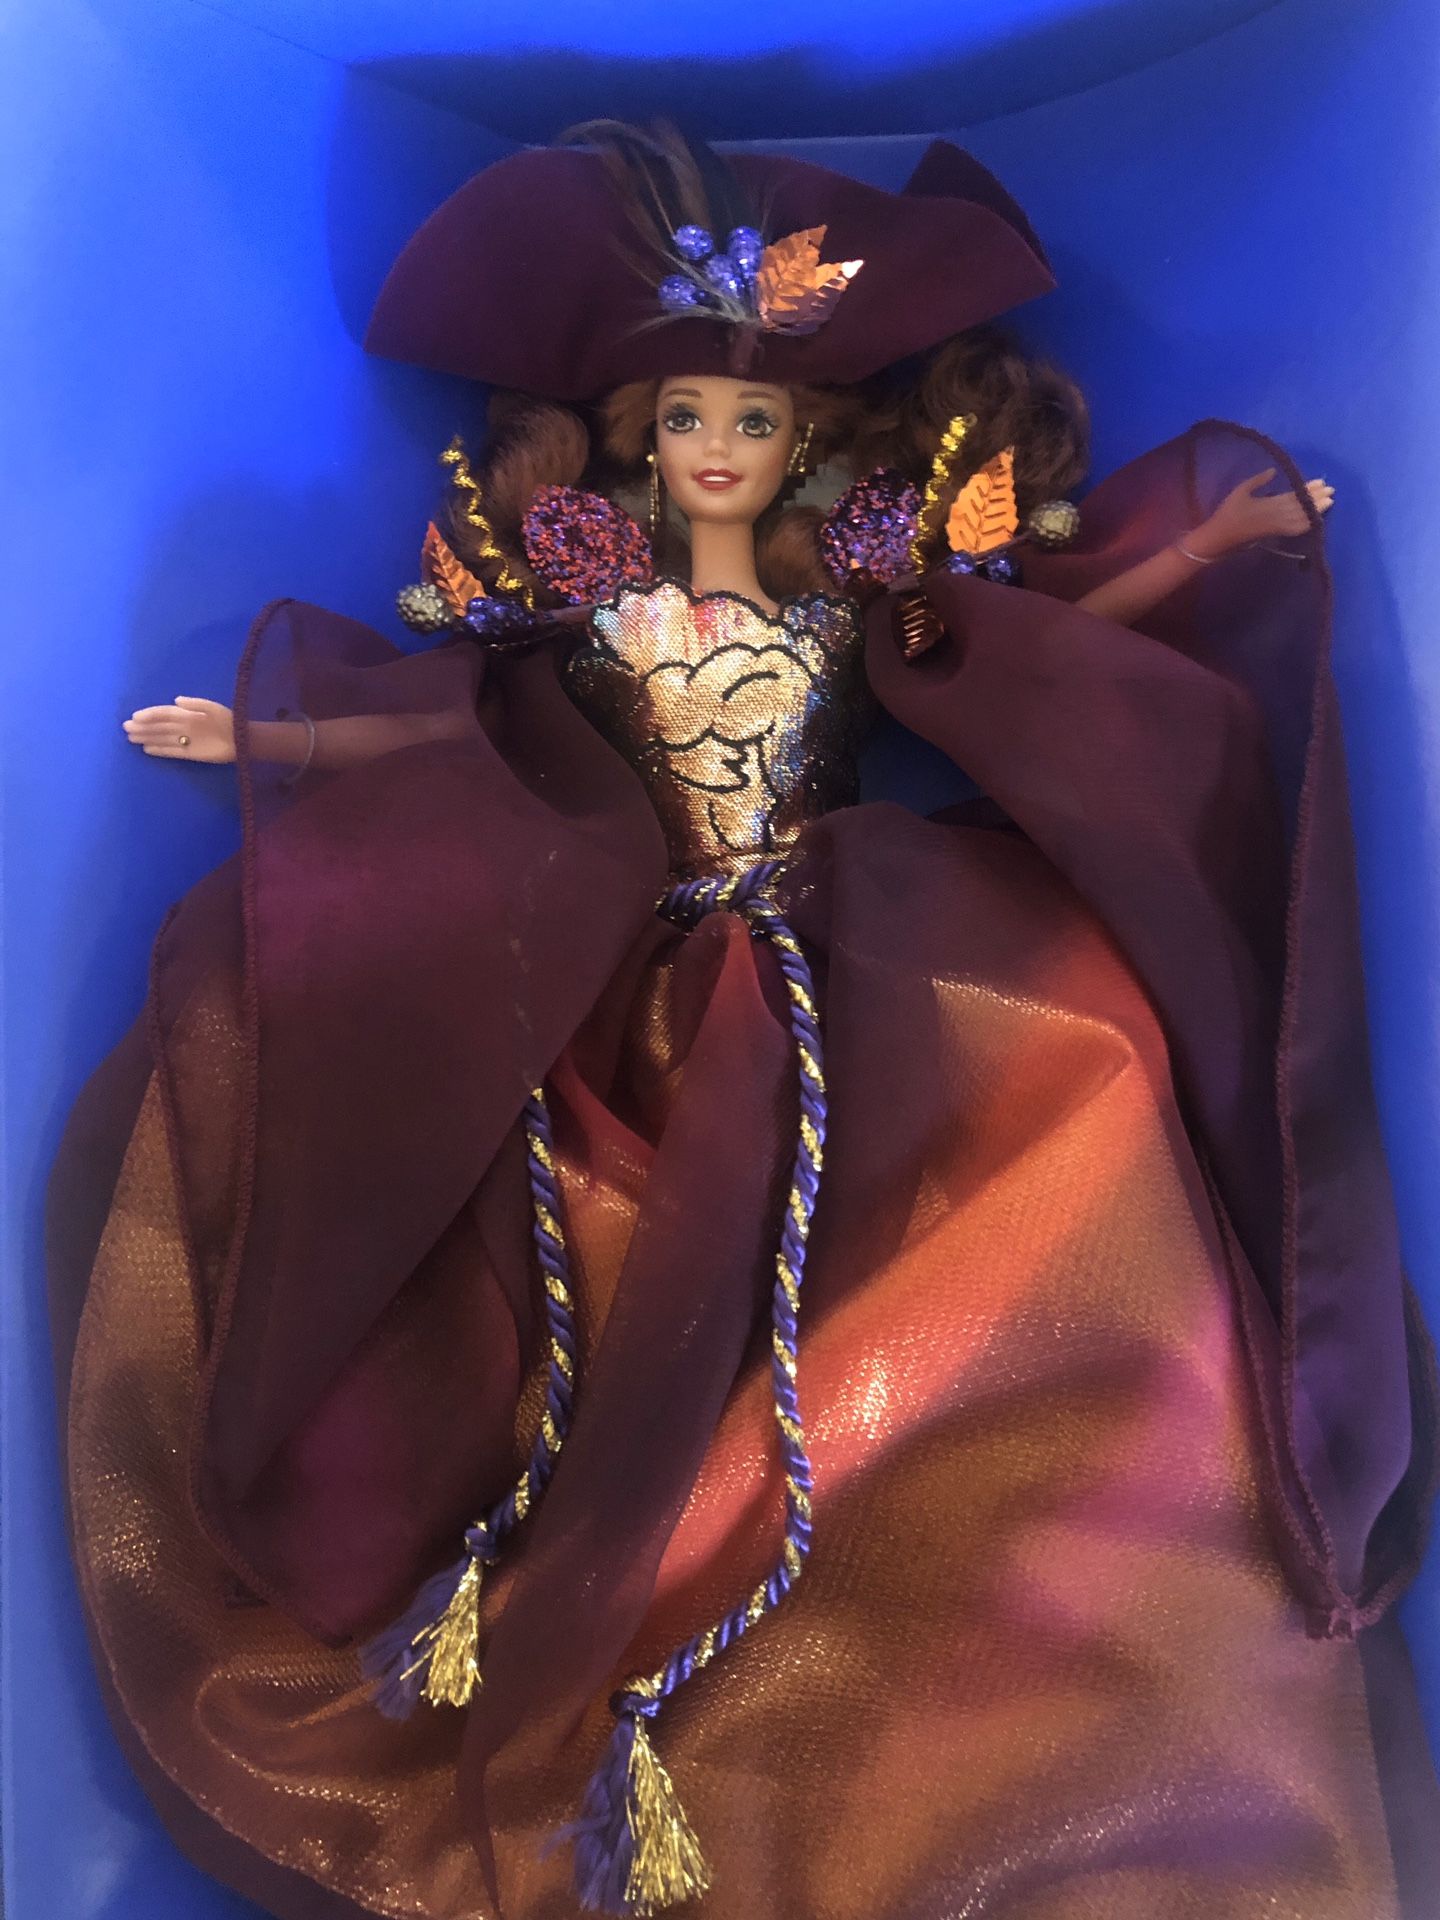 1995 autumn glory collectible barbie